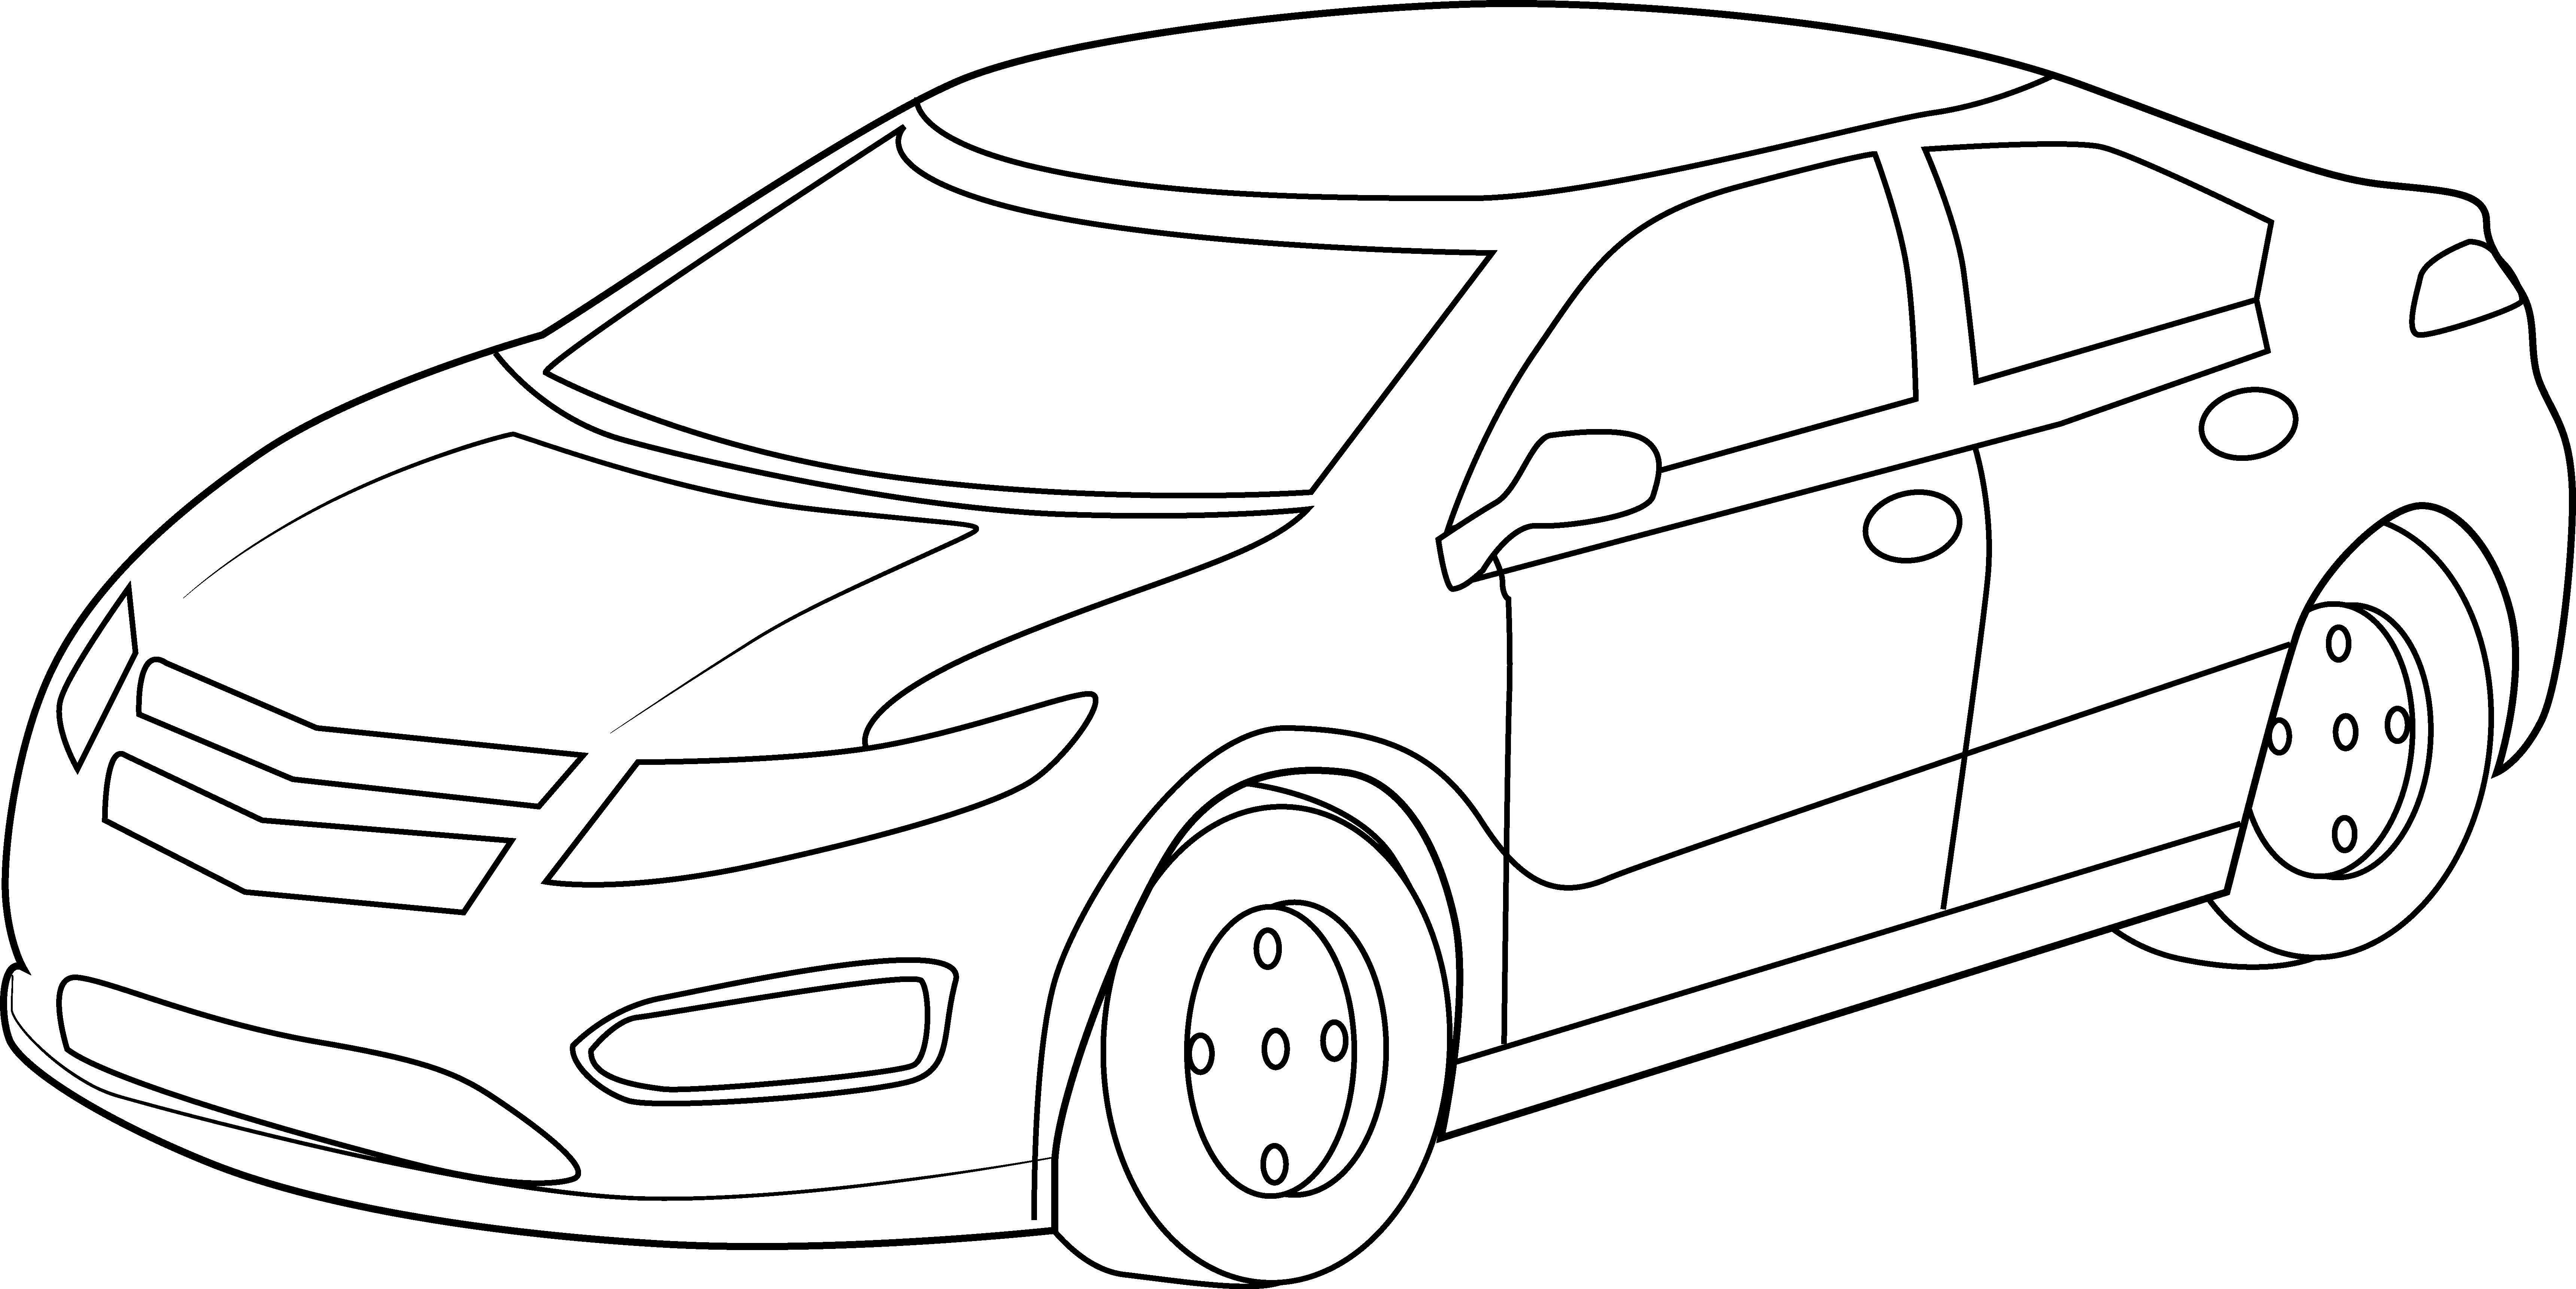 Car Clipart Black And White # - Car Black And White Clipart